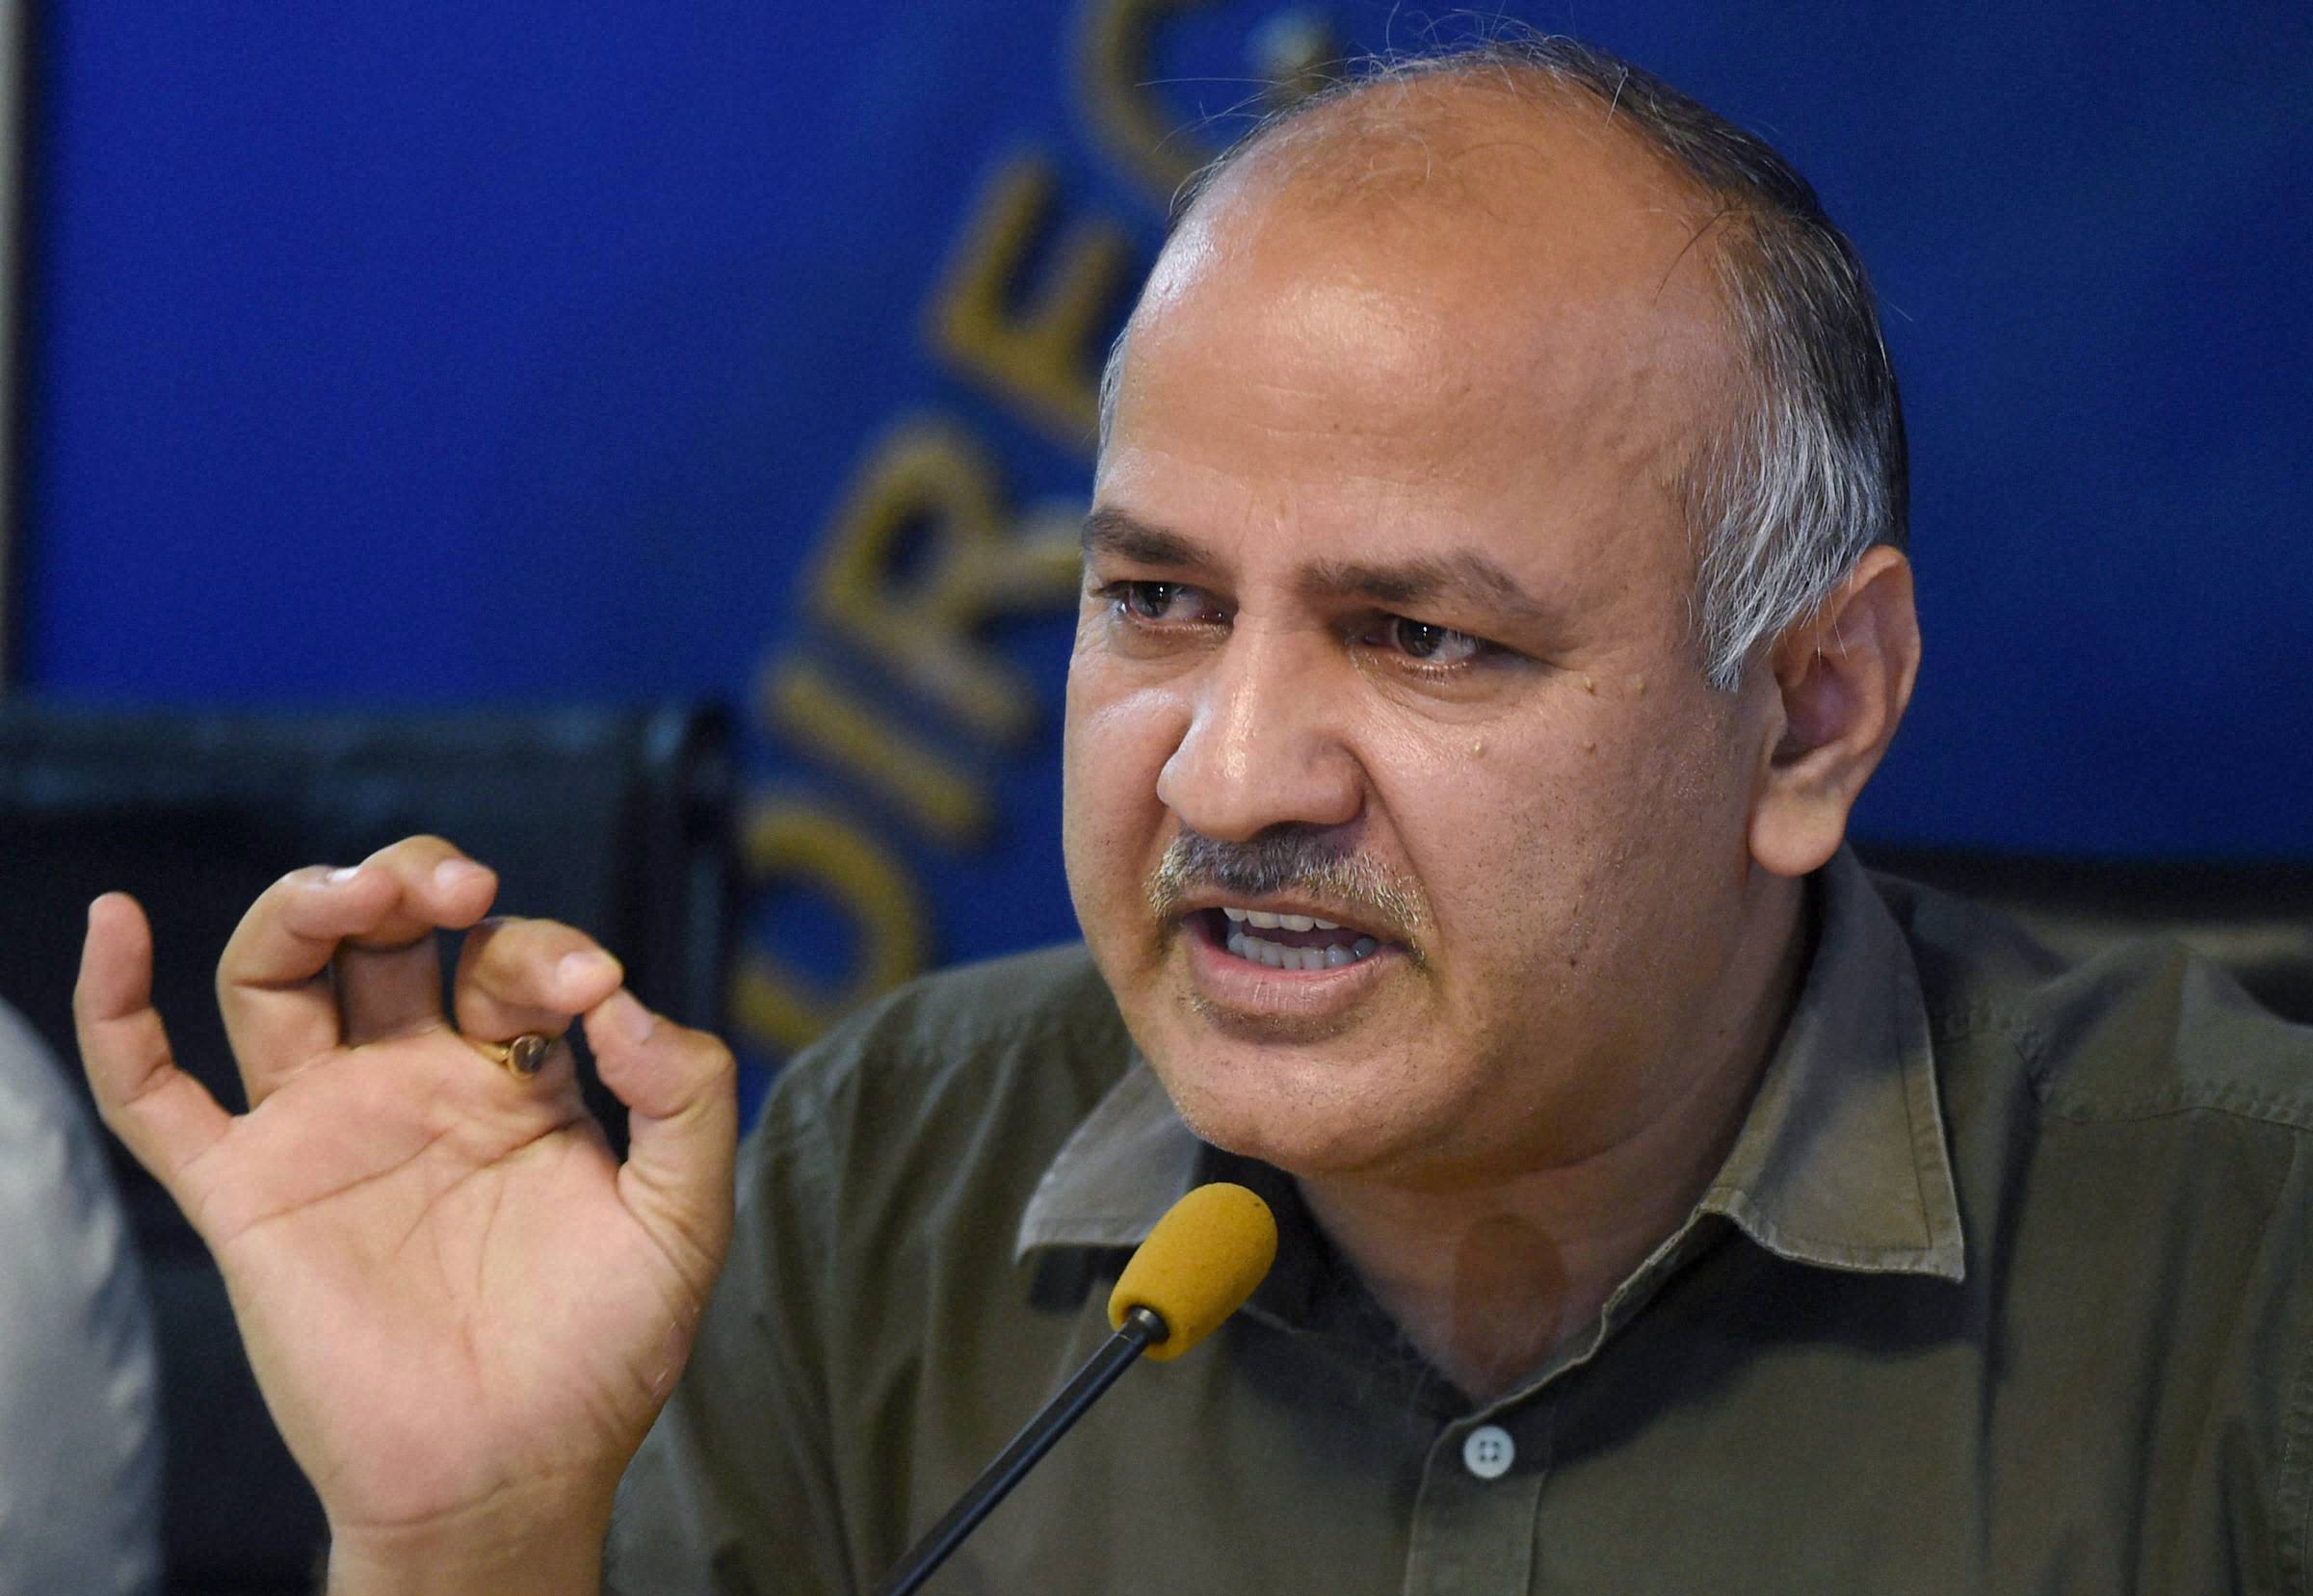 Rs 119 cr released to EDMC for salary payments: Sisodia